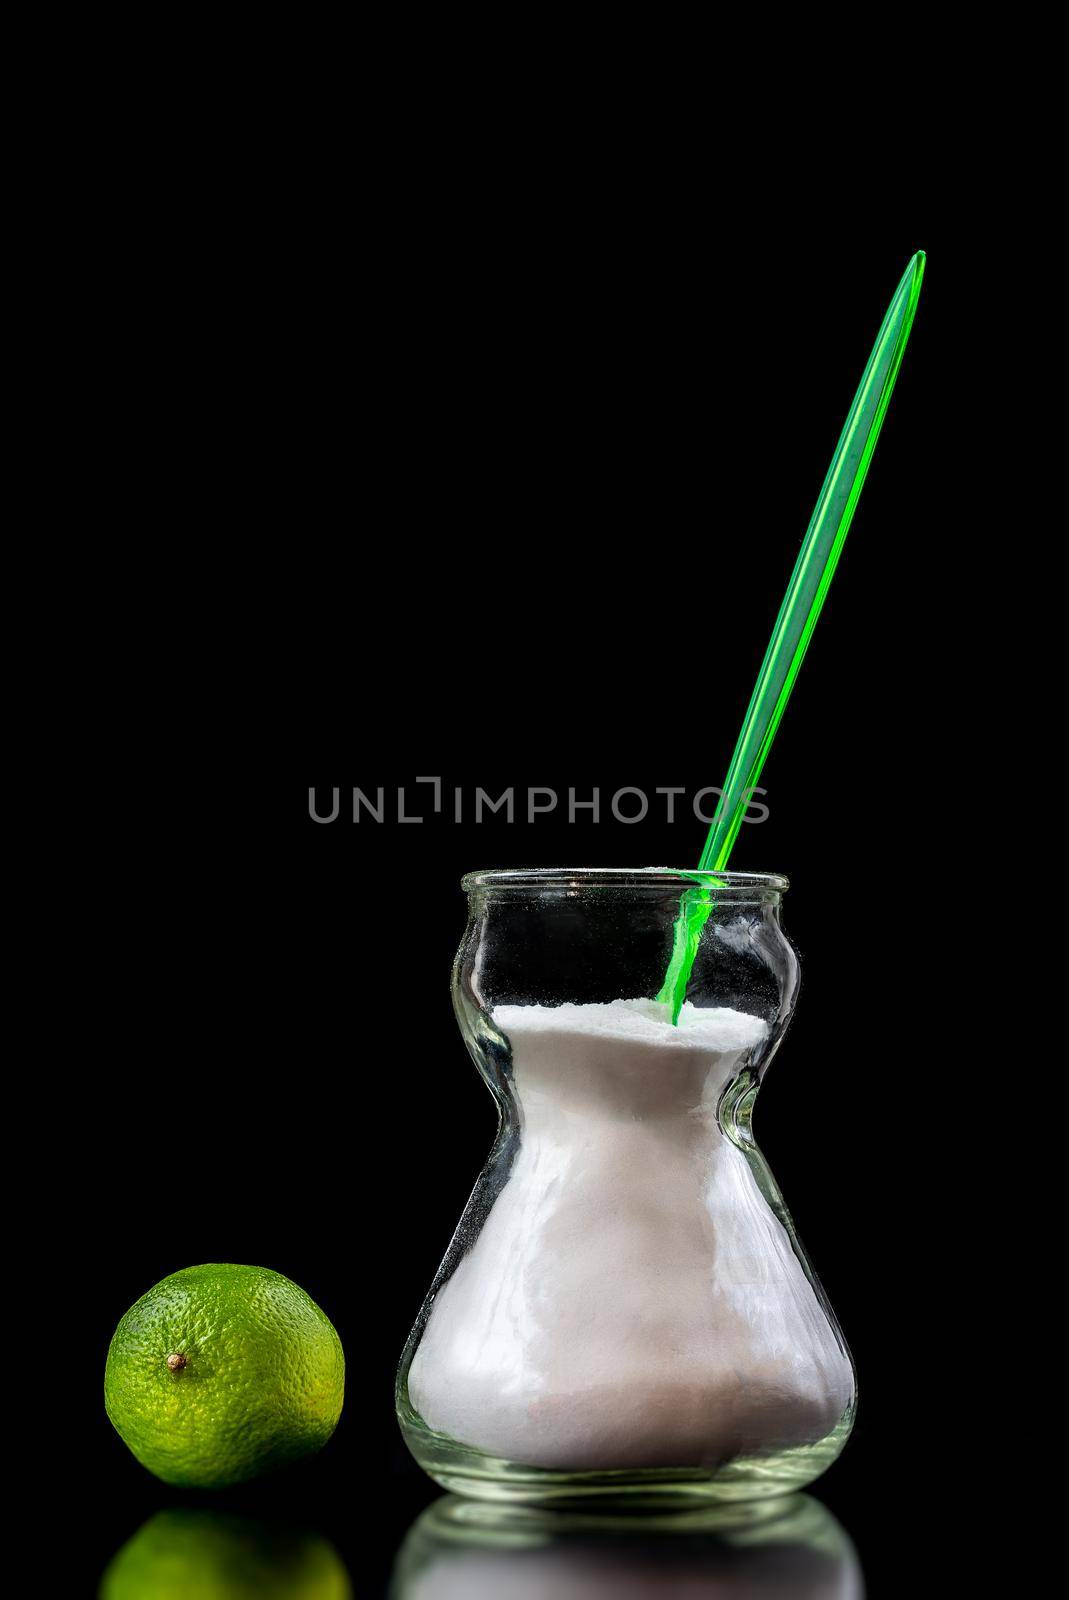 Jar of bicarbonate next to a lime in hard close-up a cropped black background